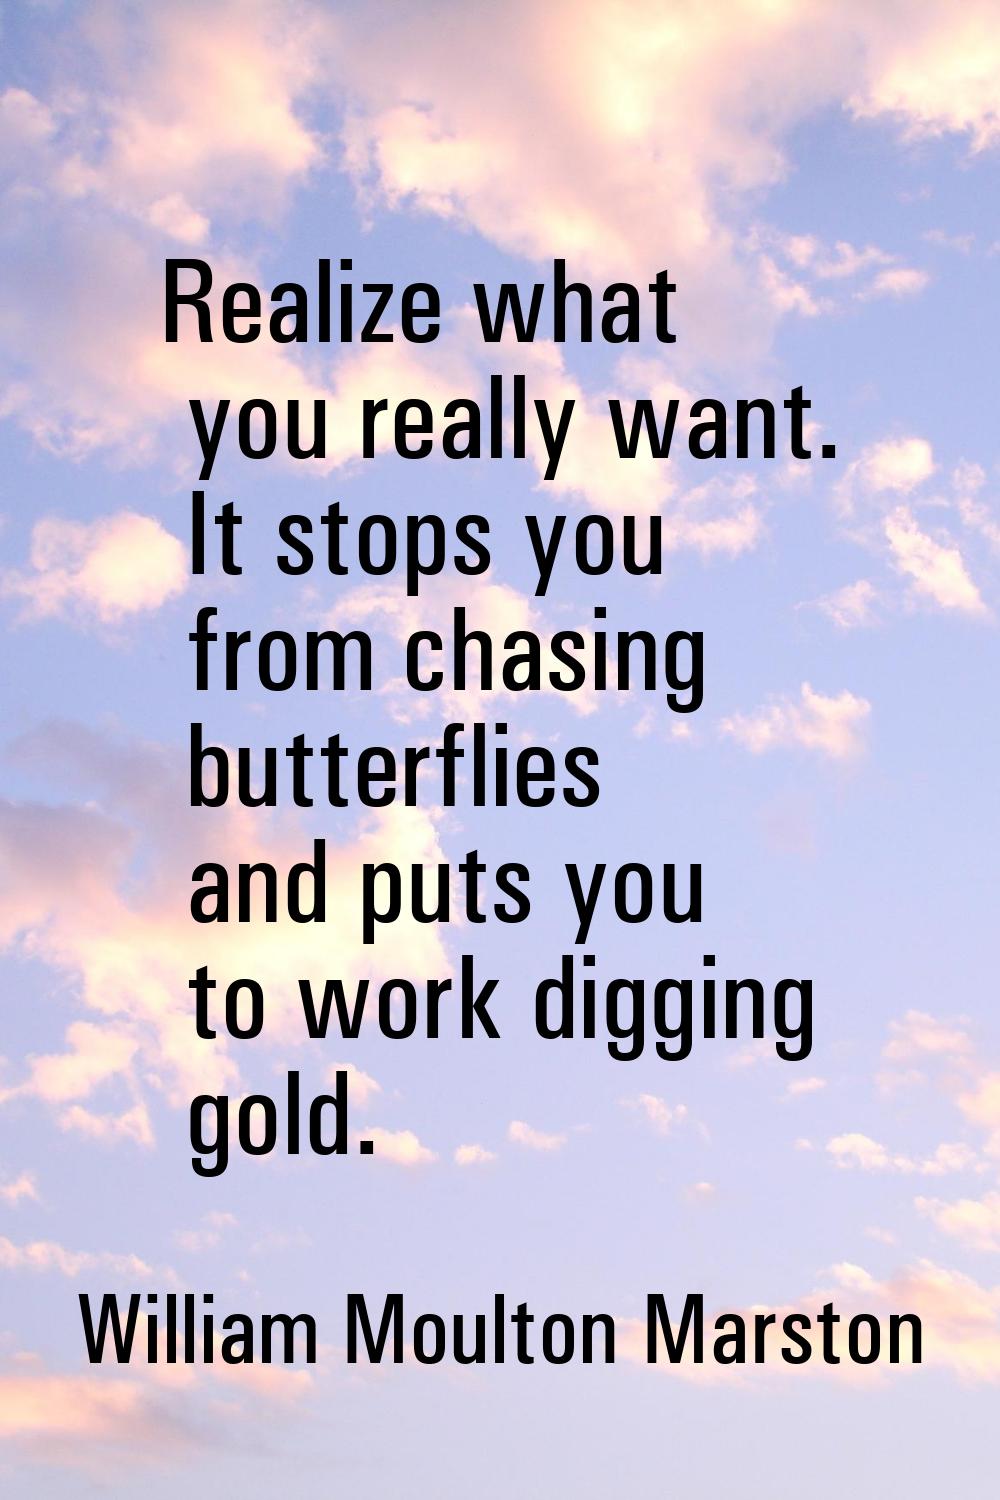 Realize what you really want. It stops you from chasing butterflies and puts you to work digging go